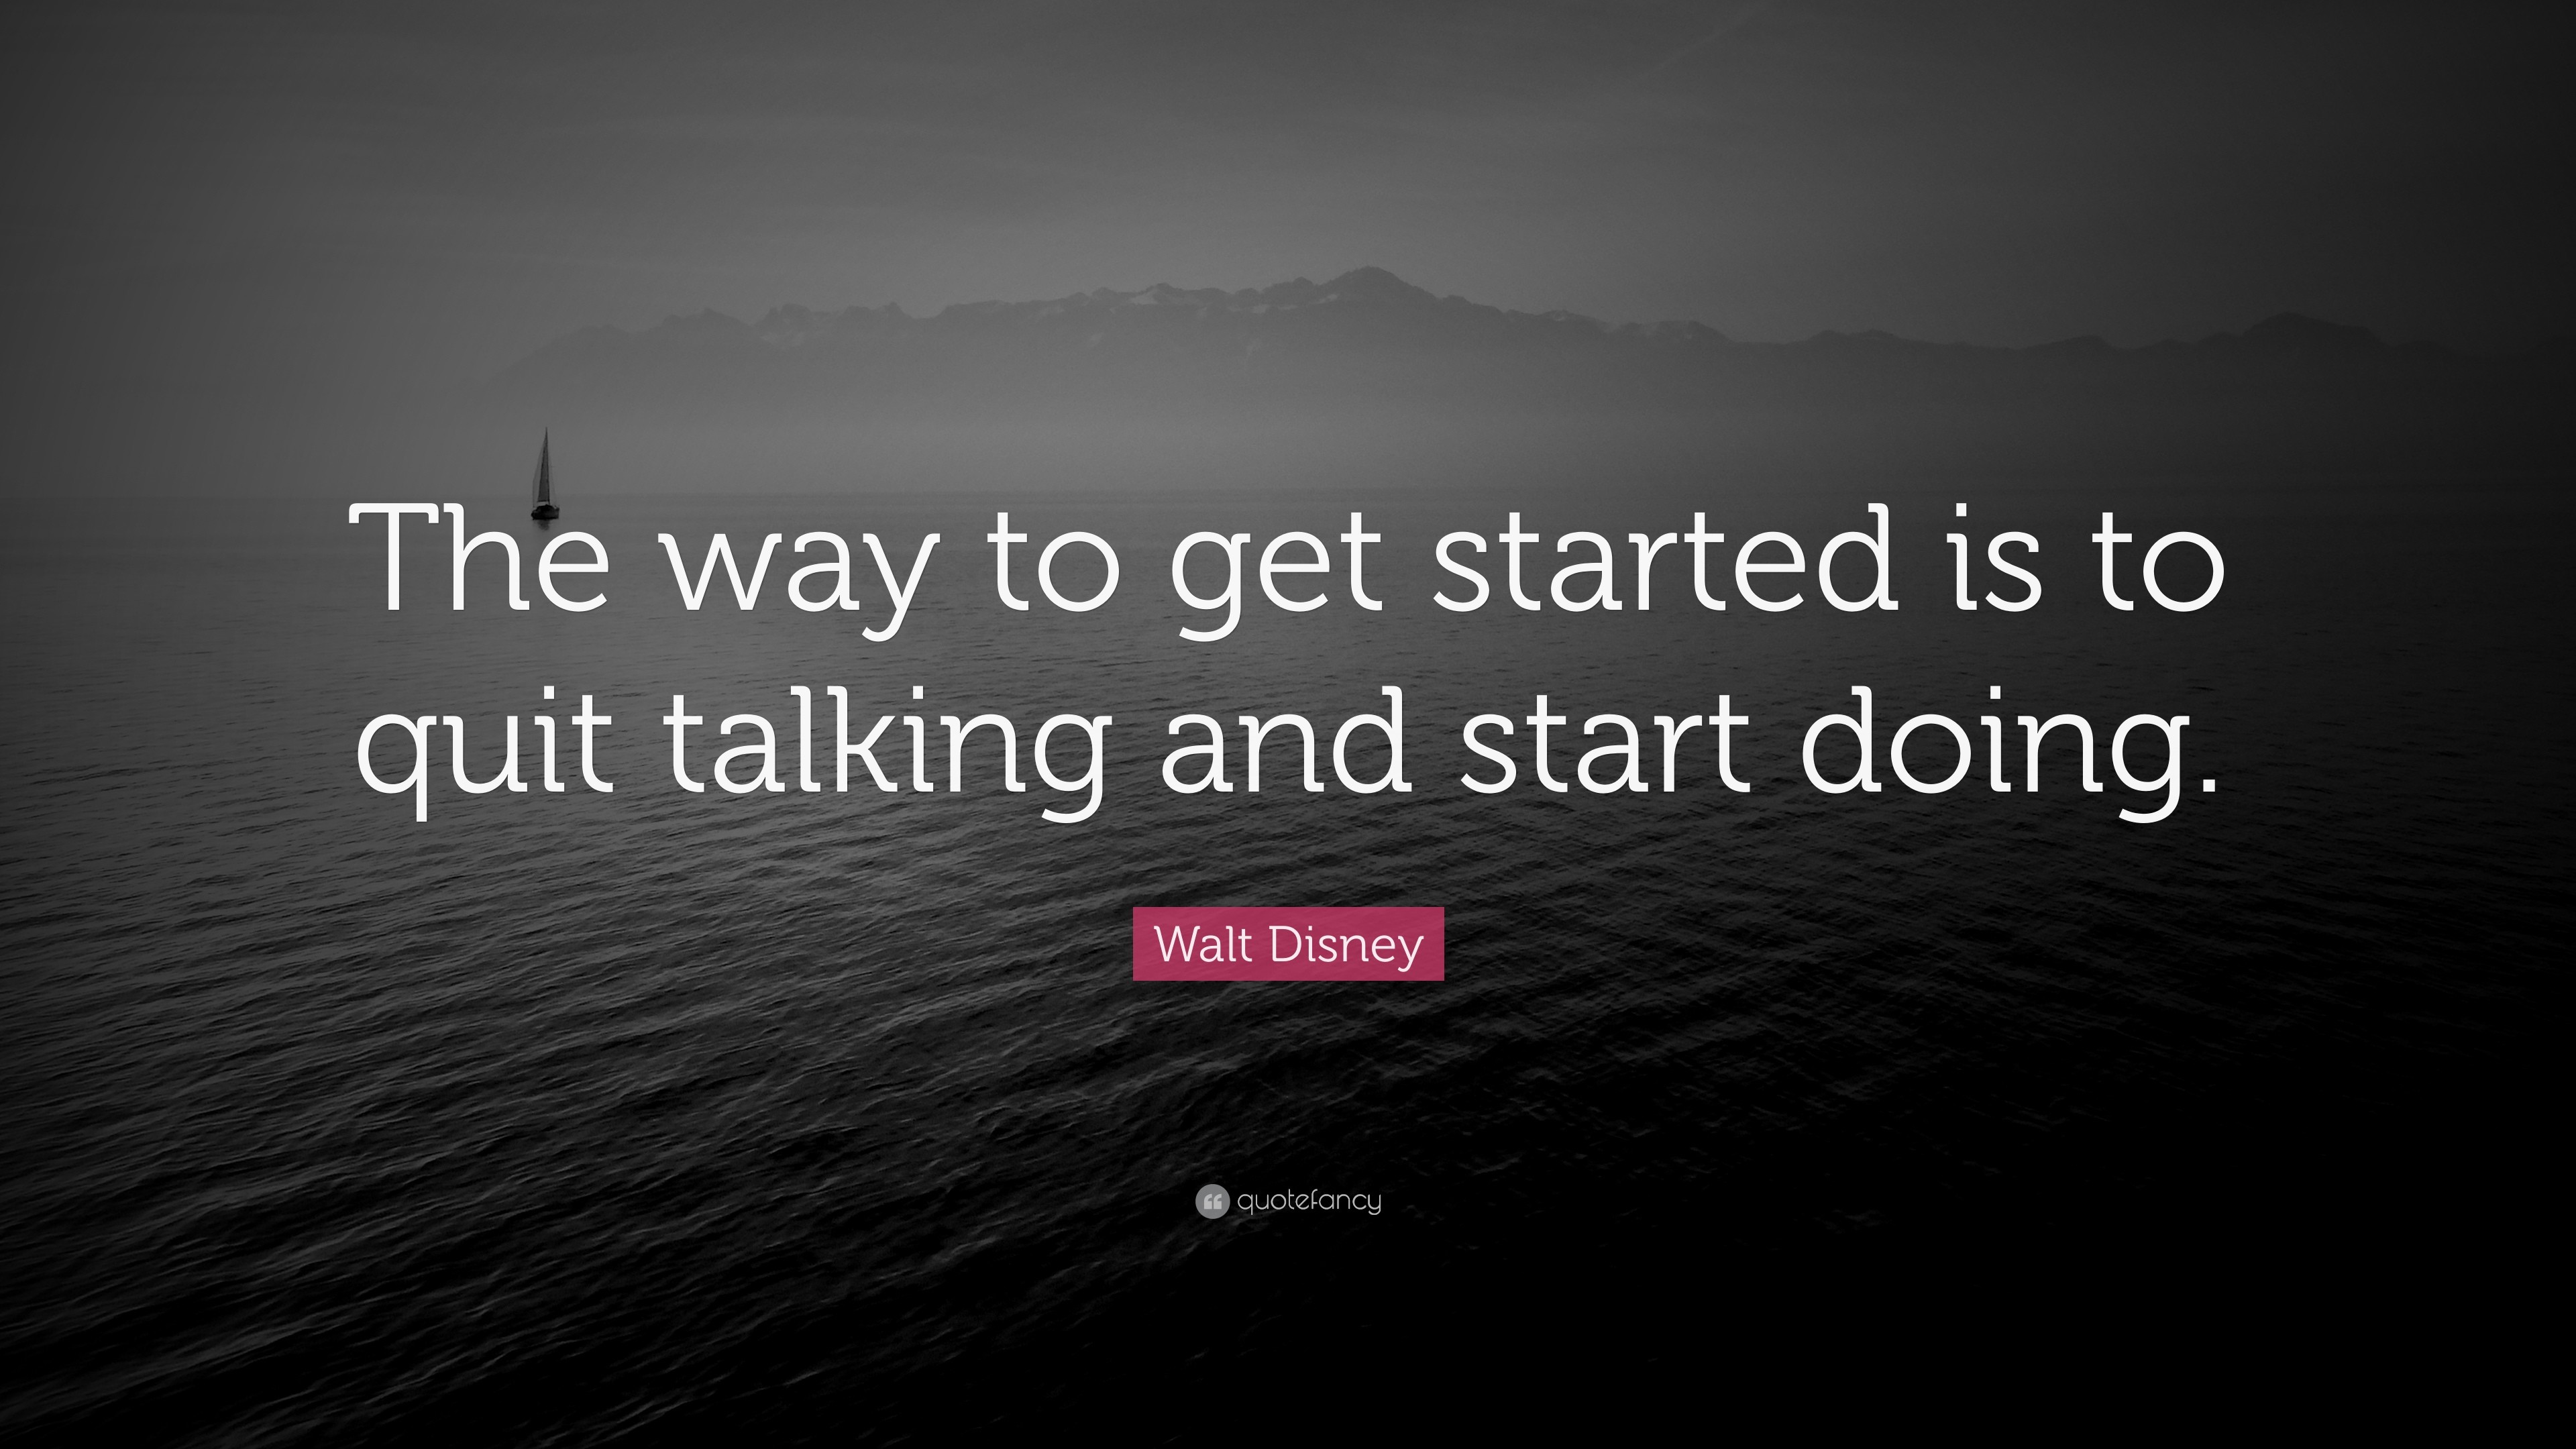 3840x2160 Walt Disney Quote: “The way to get started is to quit talking and start